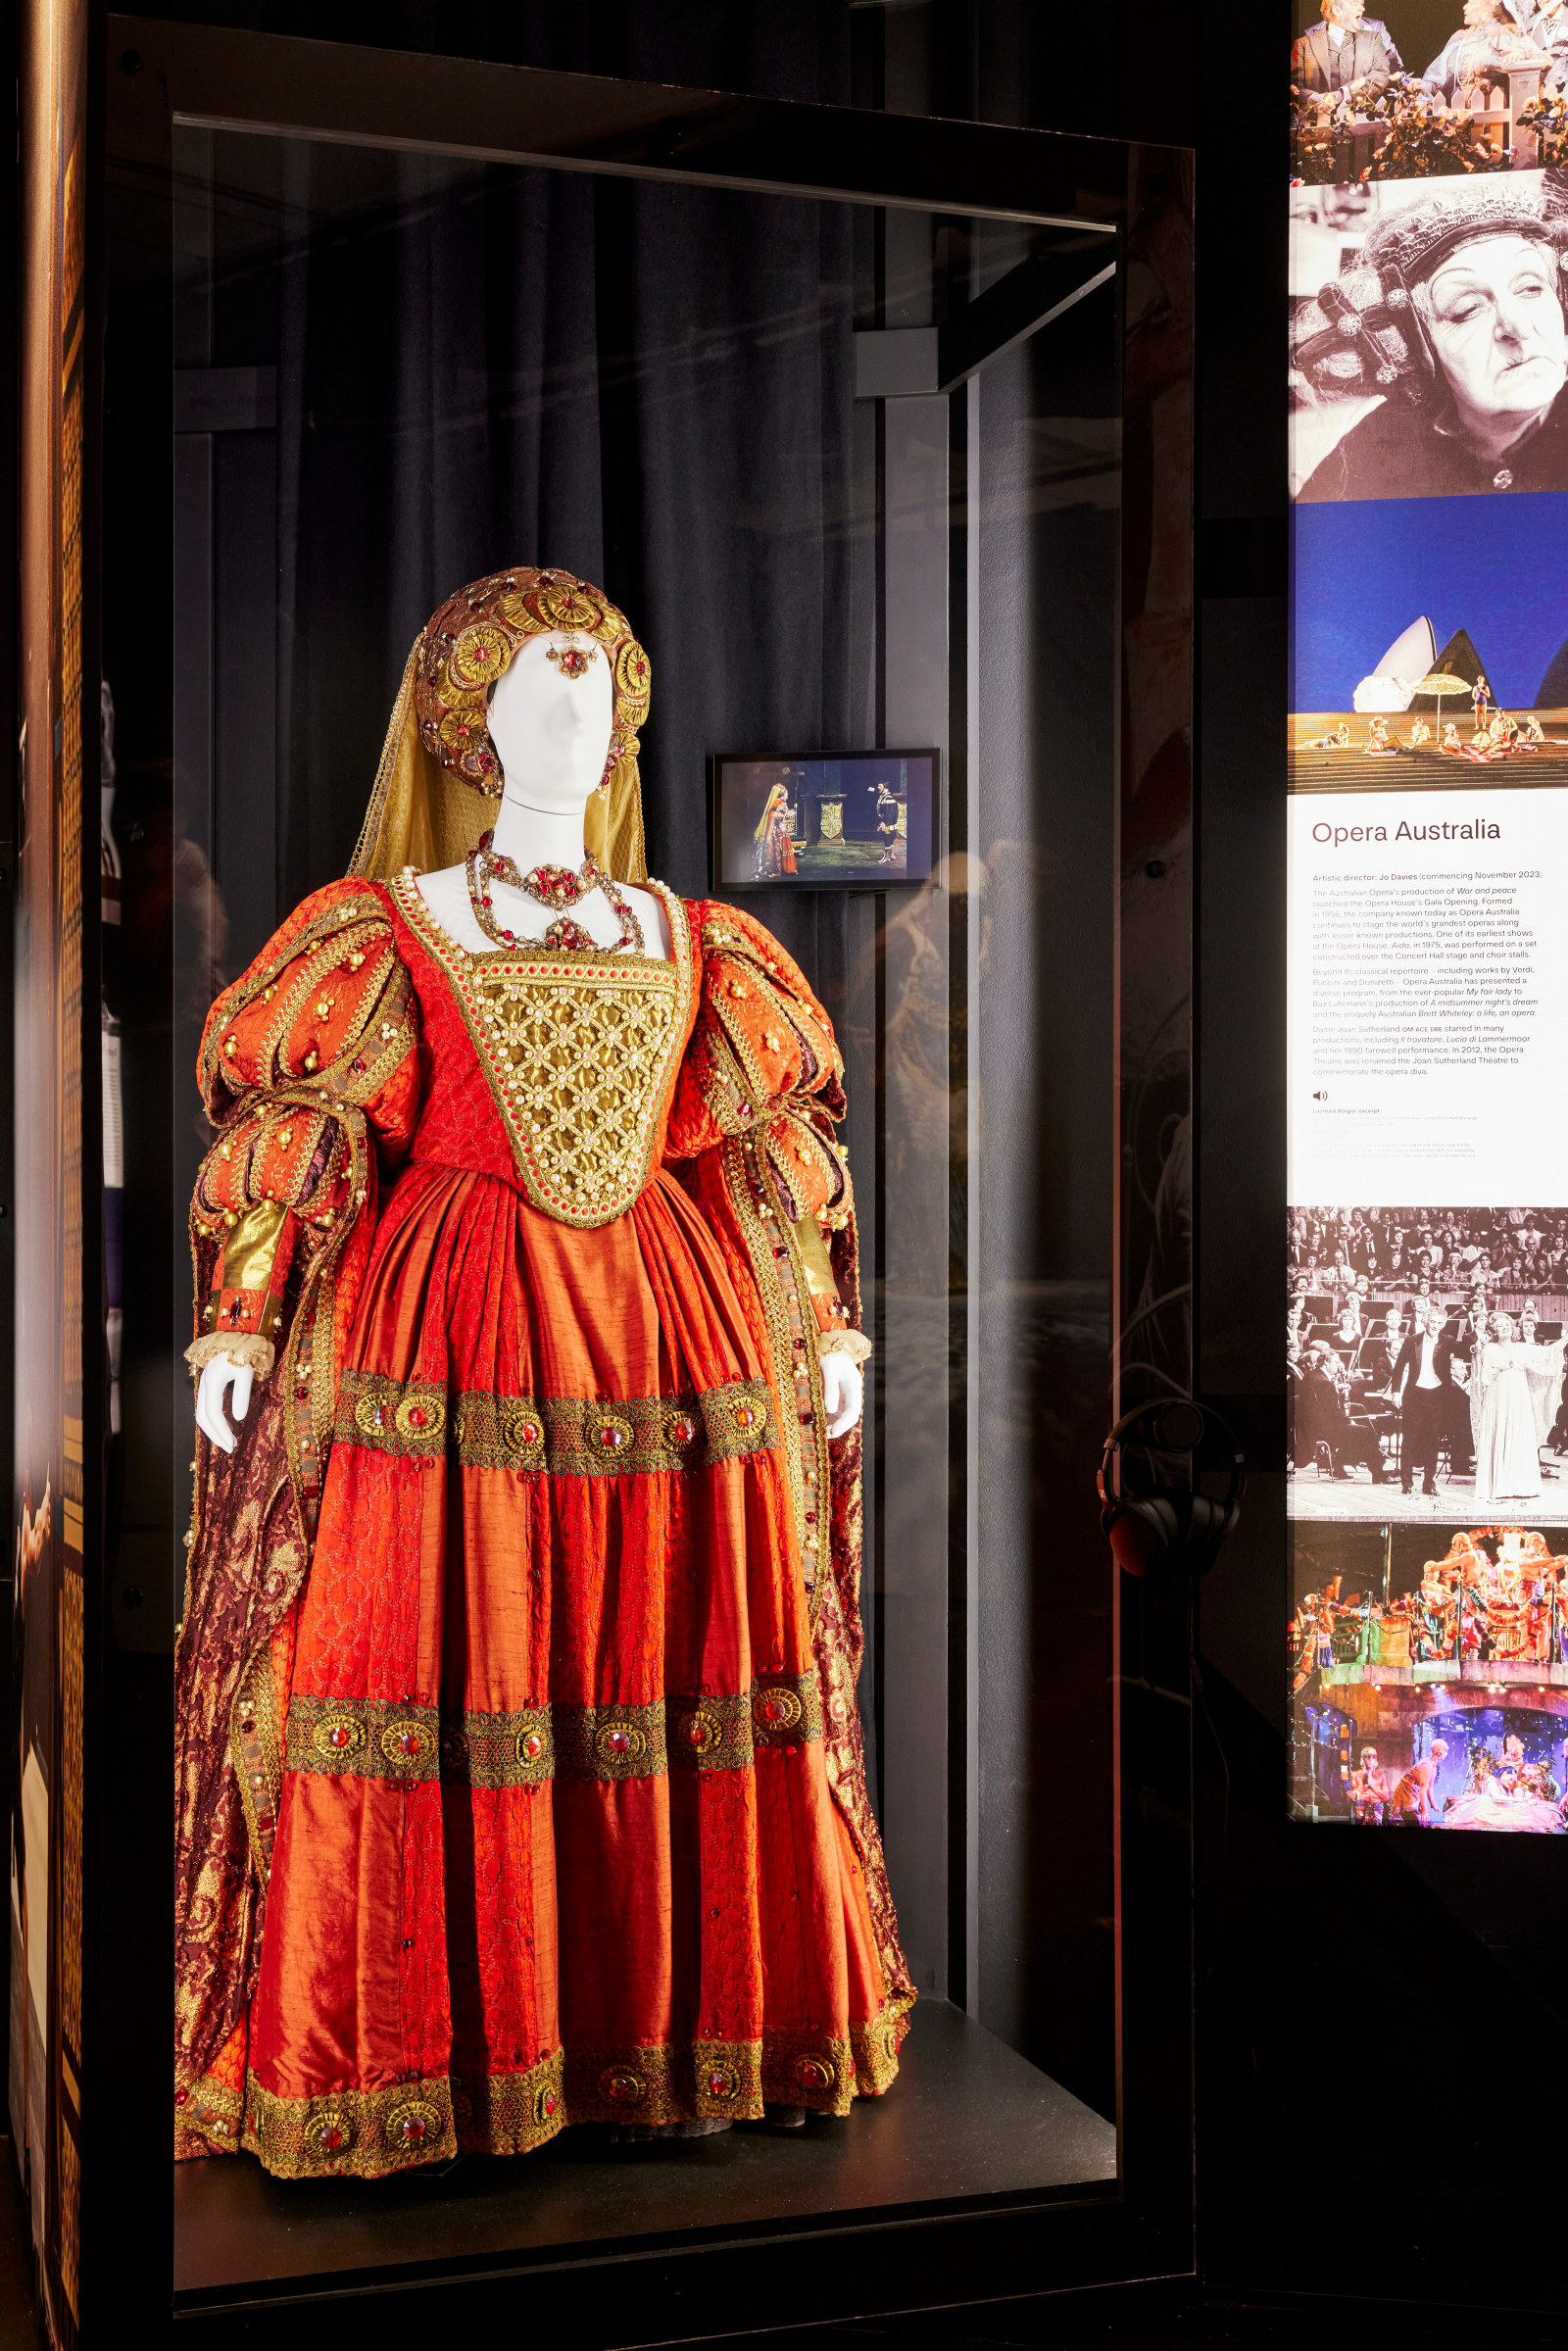 View of Costume worn by Dame Joan Sutherland in 'Lucrezia Borgia' in showcase display - The People's House marketing & installation photoshoot